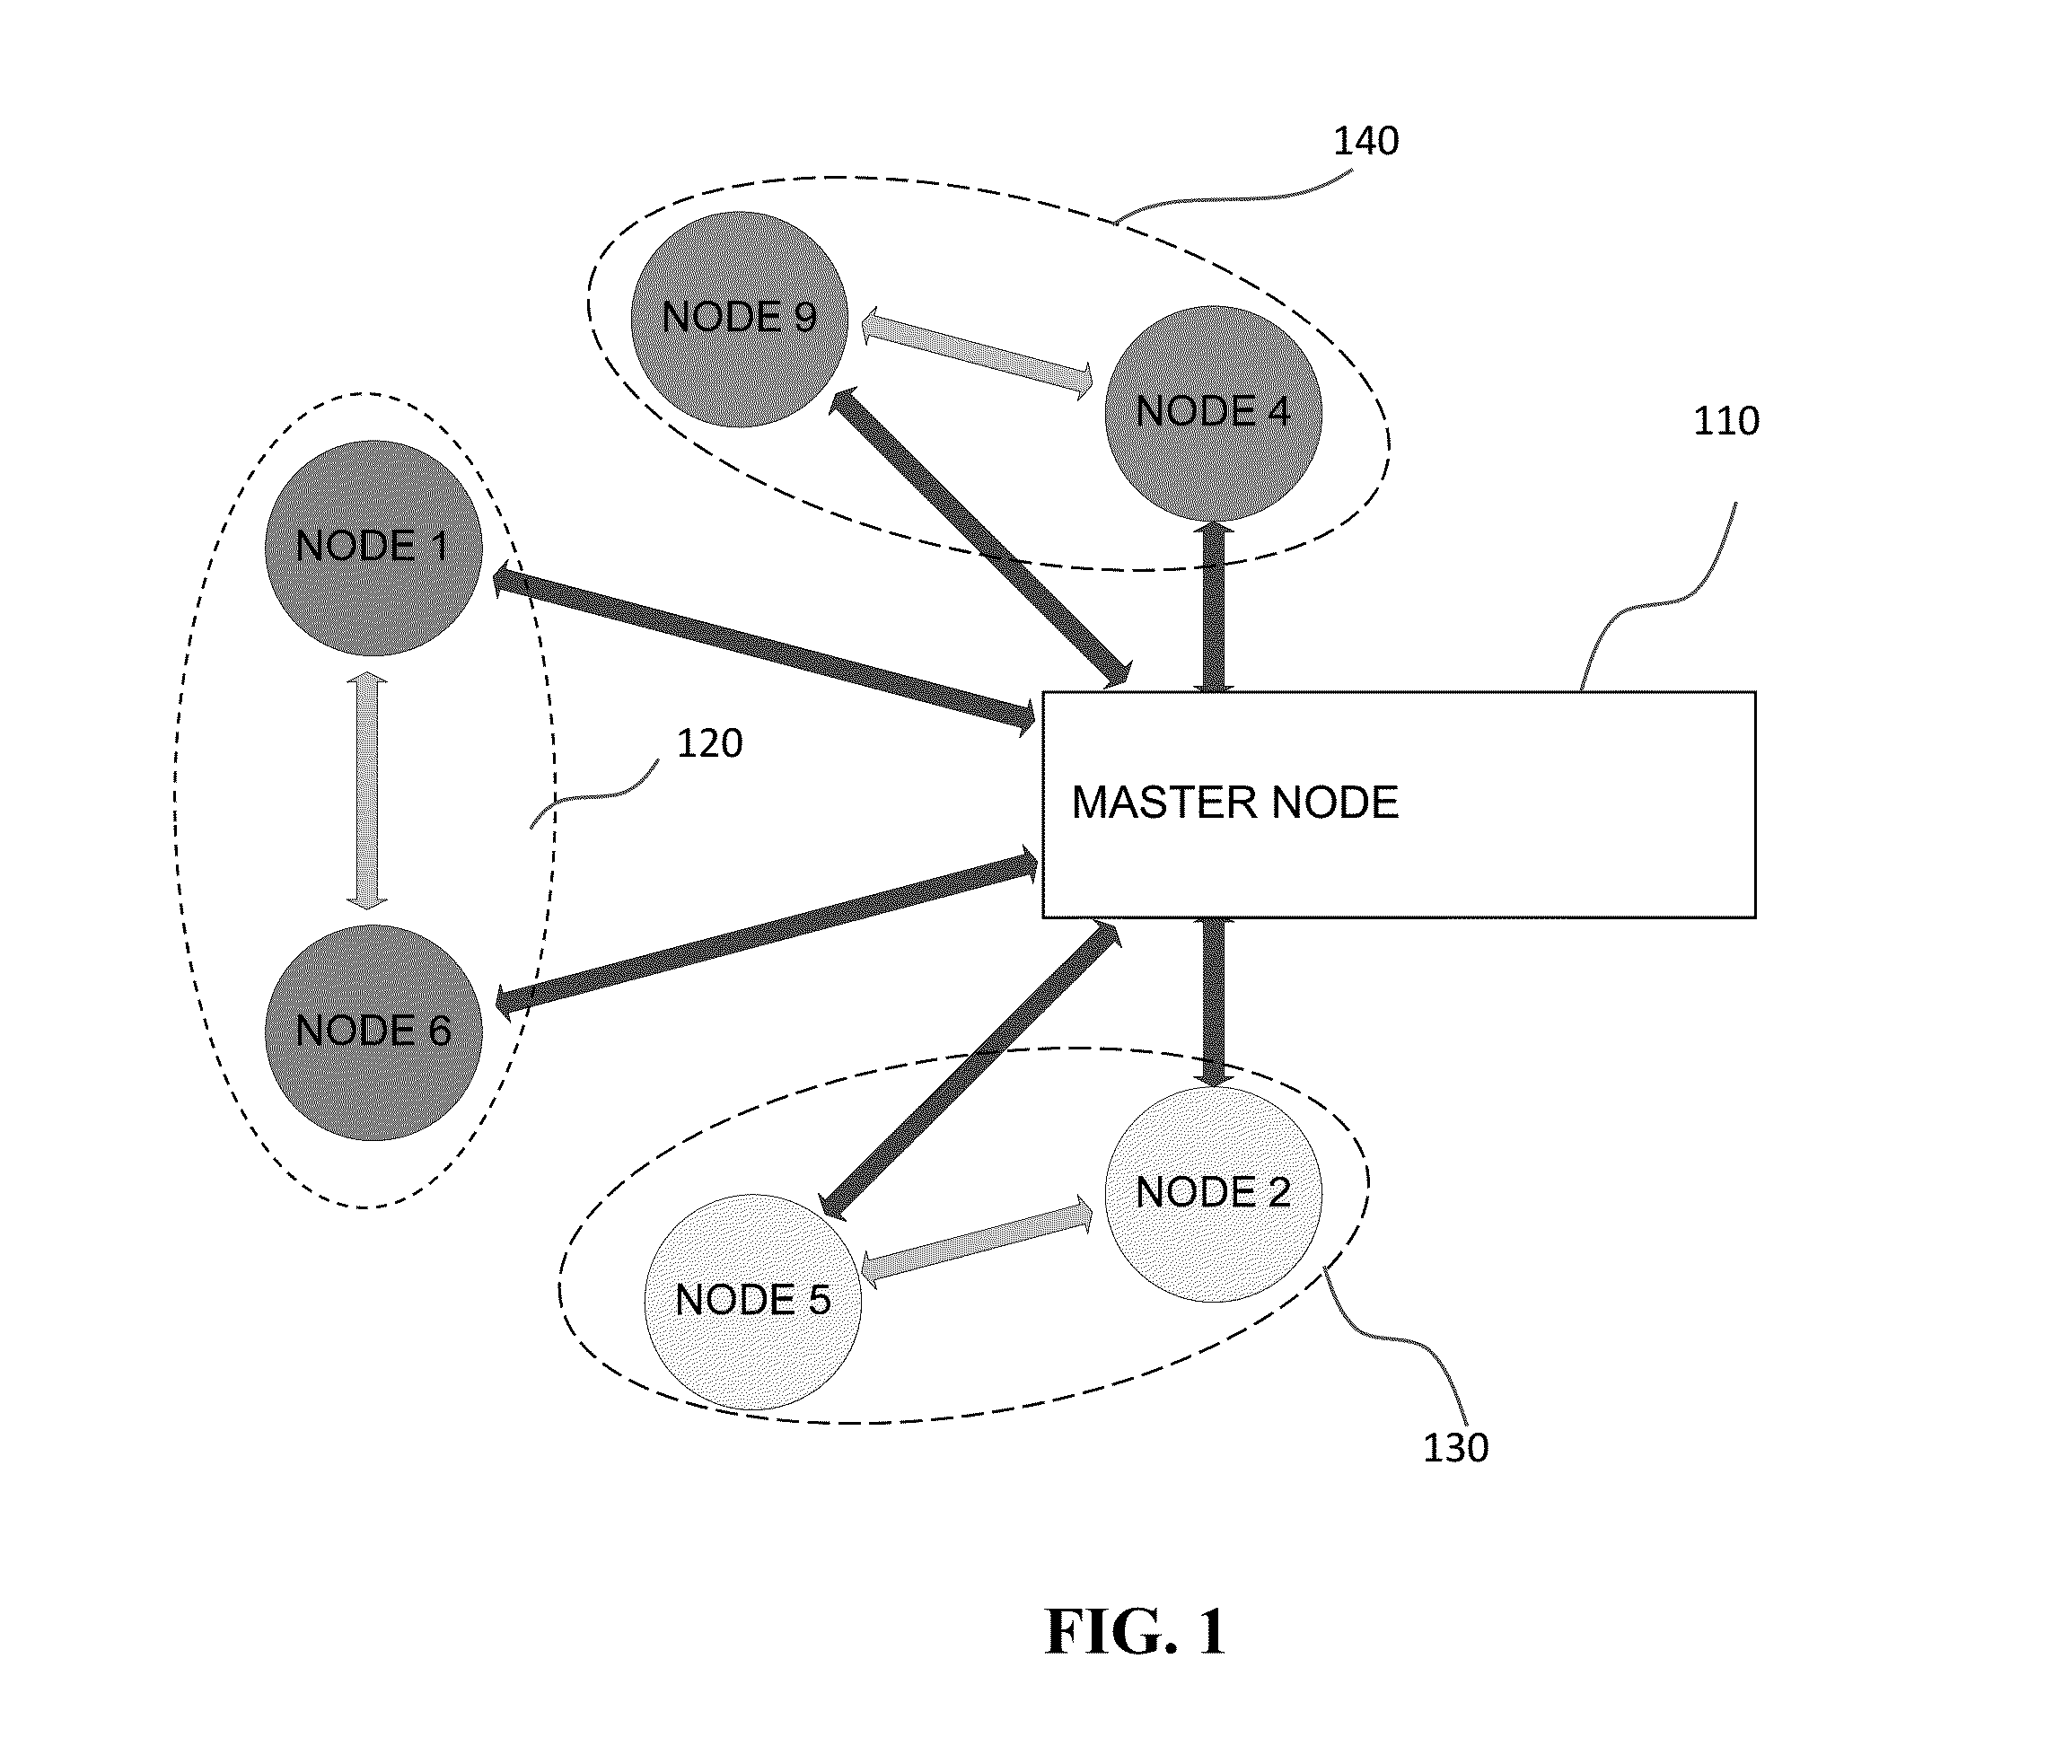 System and method for monitoring and diagnosing patient condition based on wireless sensor monitoring data